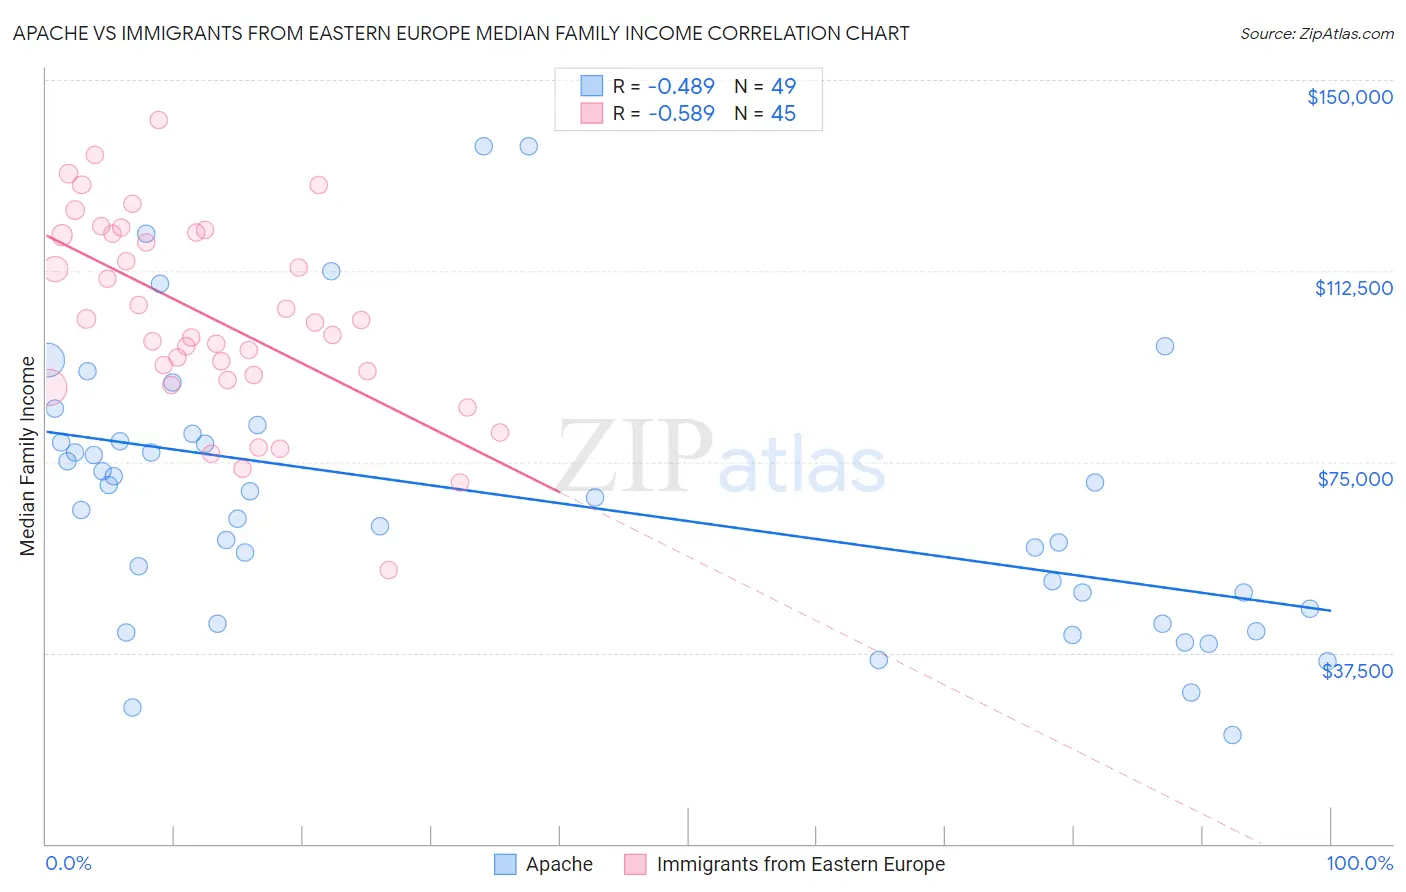 Apache vs Immigrants from Eastern Europe Median Family Income